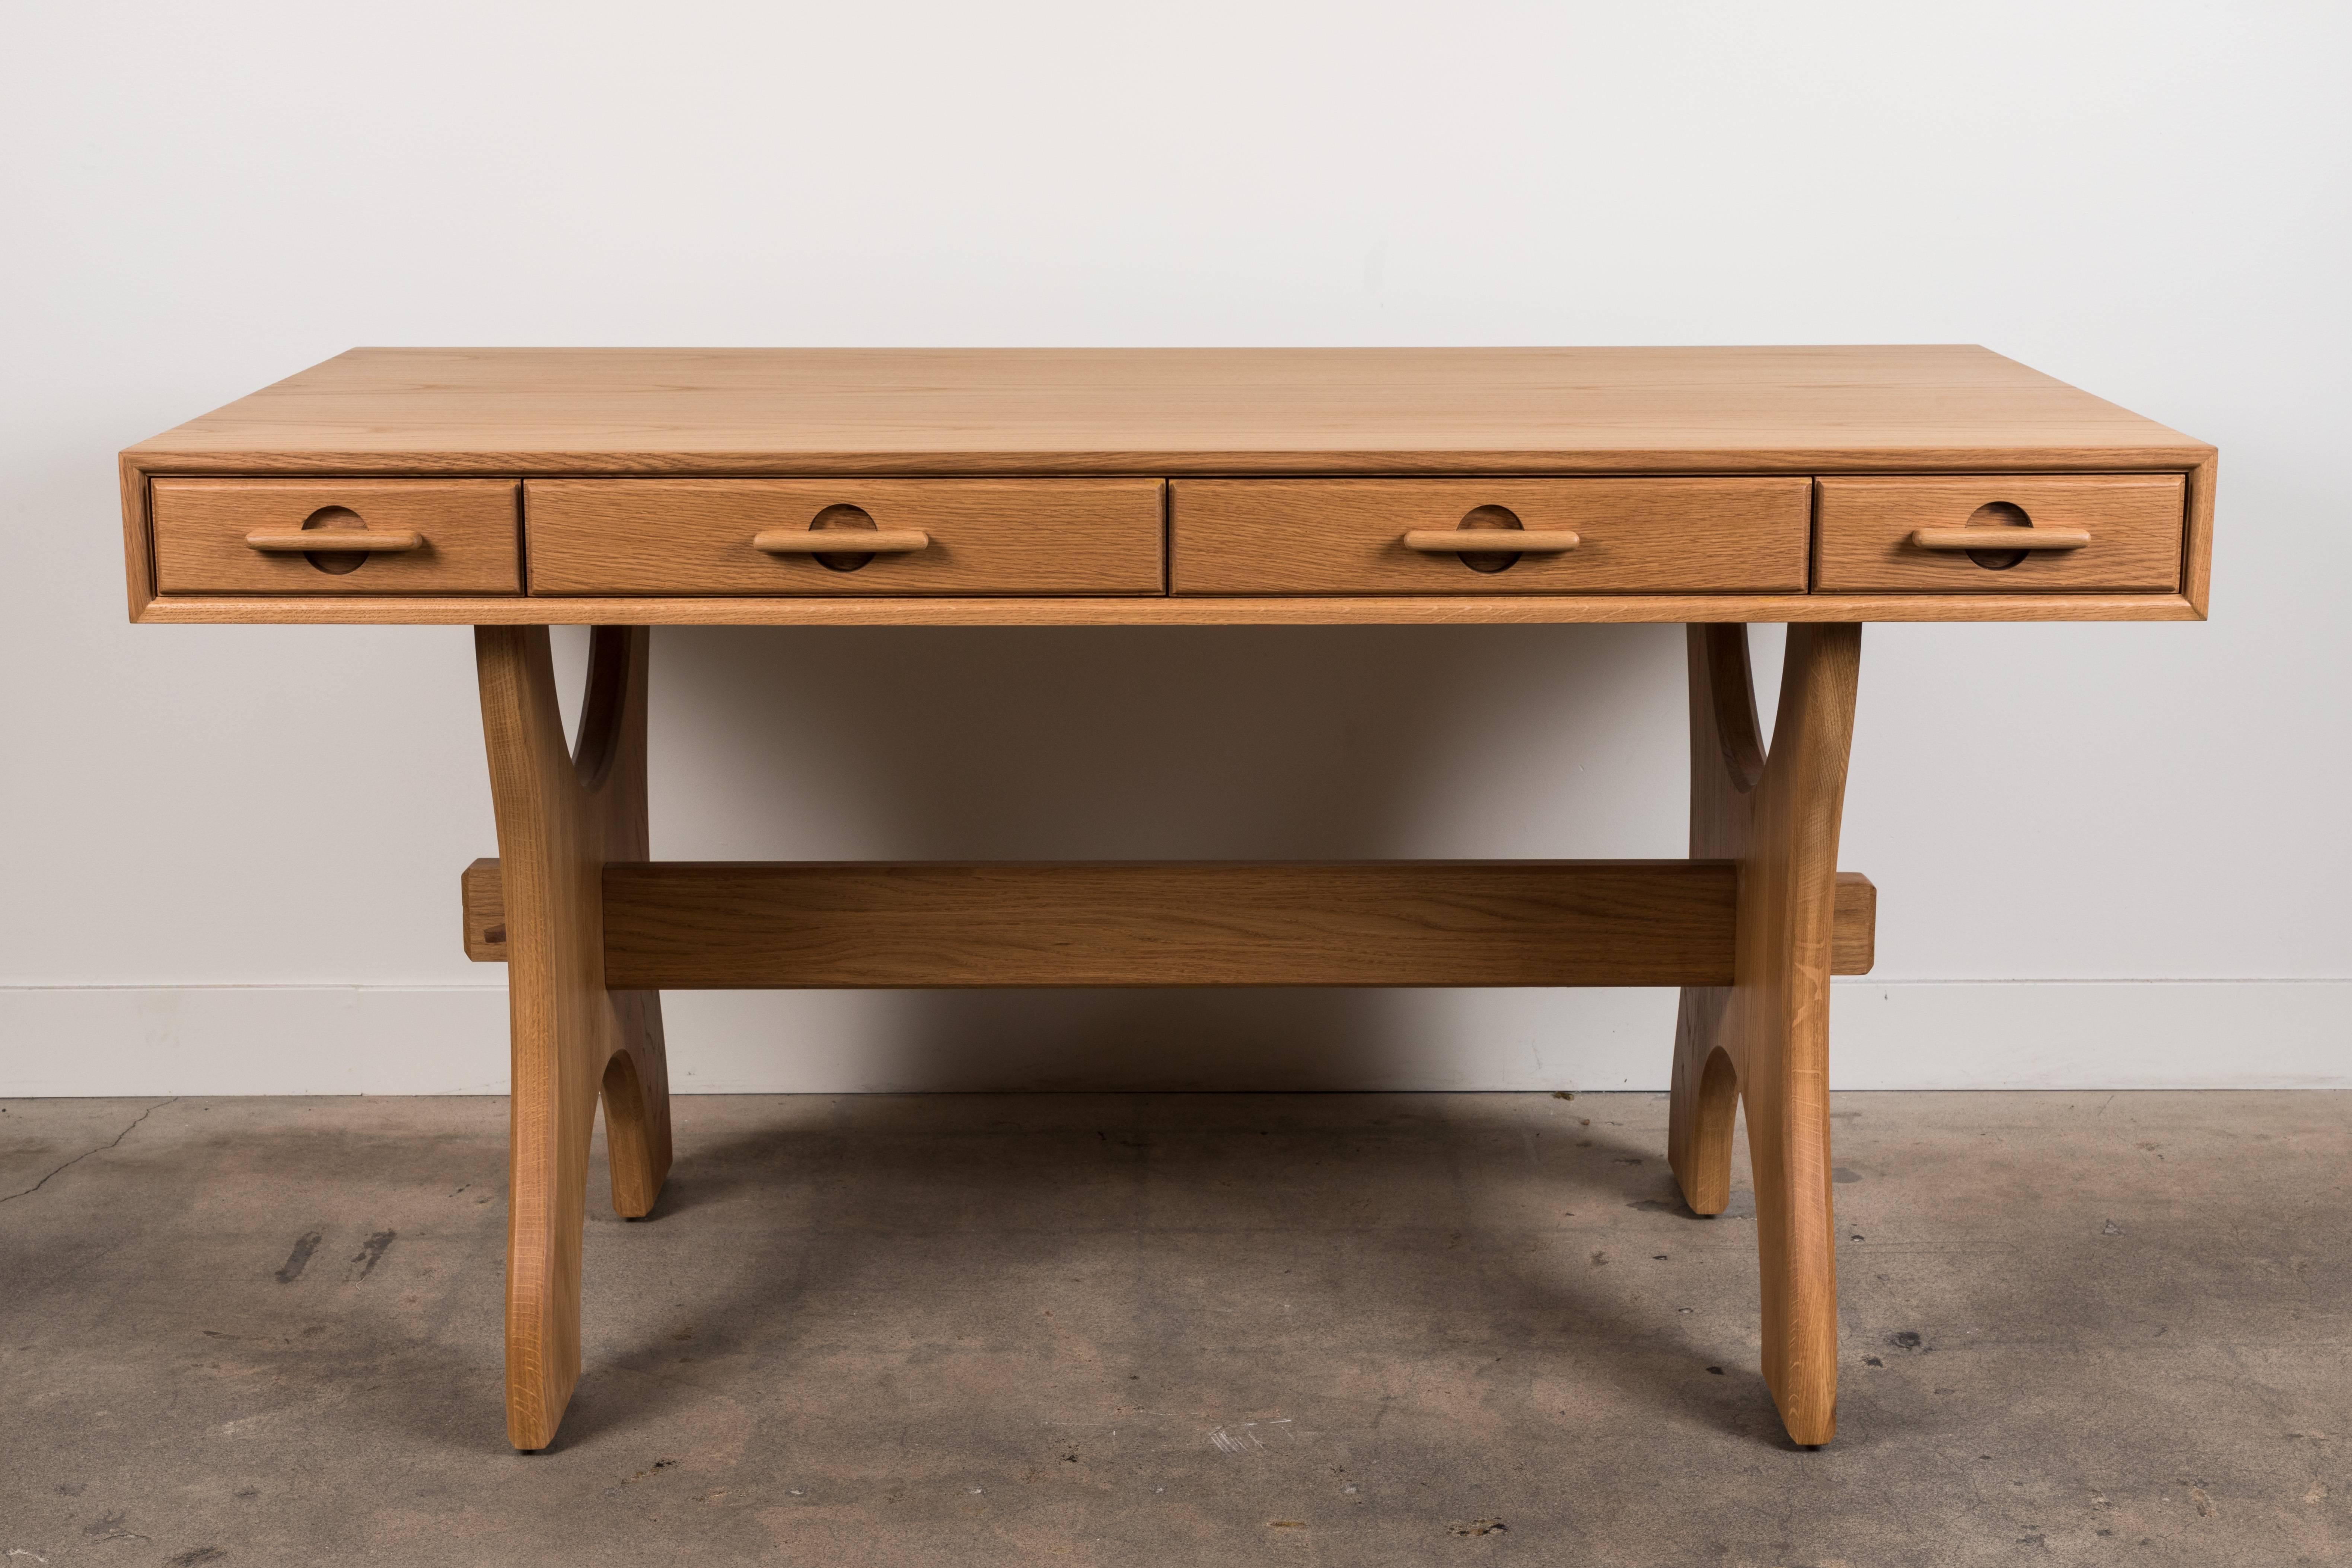 The Ojai desk has four drawers and features solid American walnut or white oak trestle legs. The drawer handles are made of solid carved wood. Shown here in Oiled Oak. Available finishes may vary. 

The Lawson-Fenning Collection is designed and